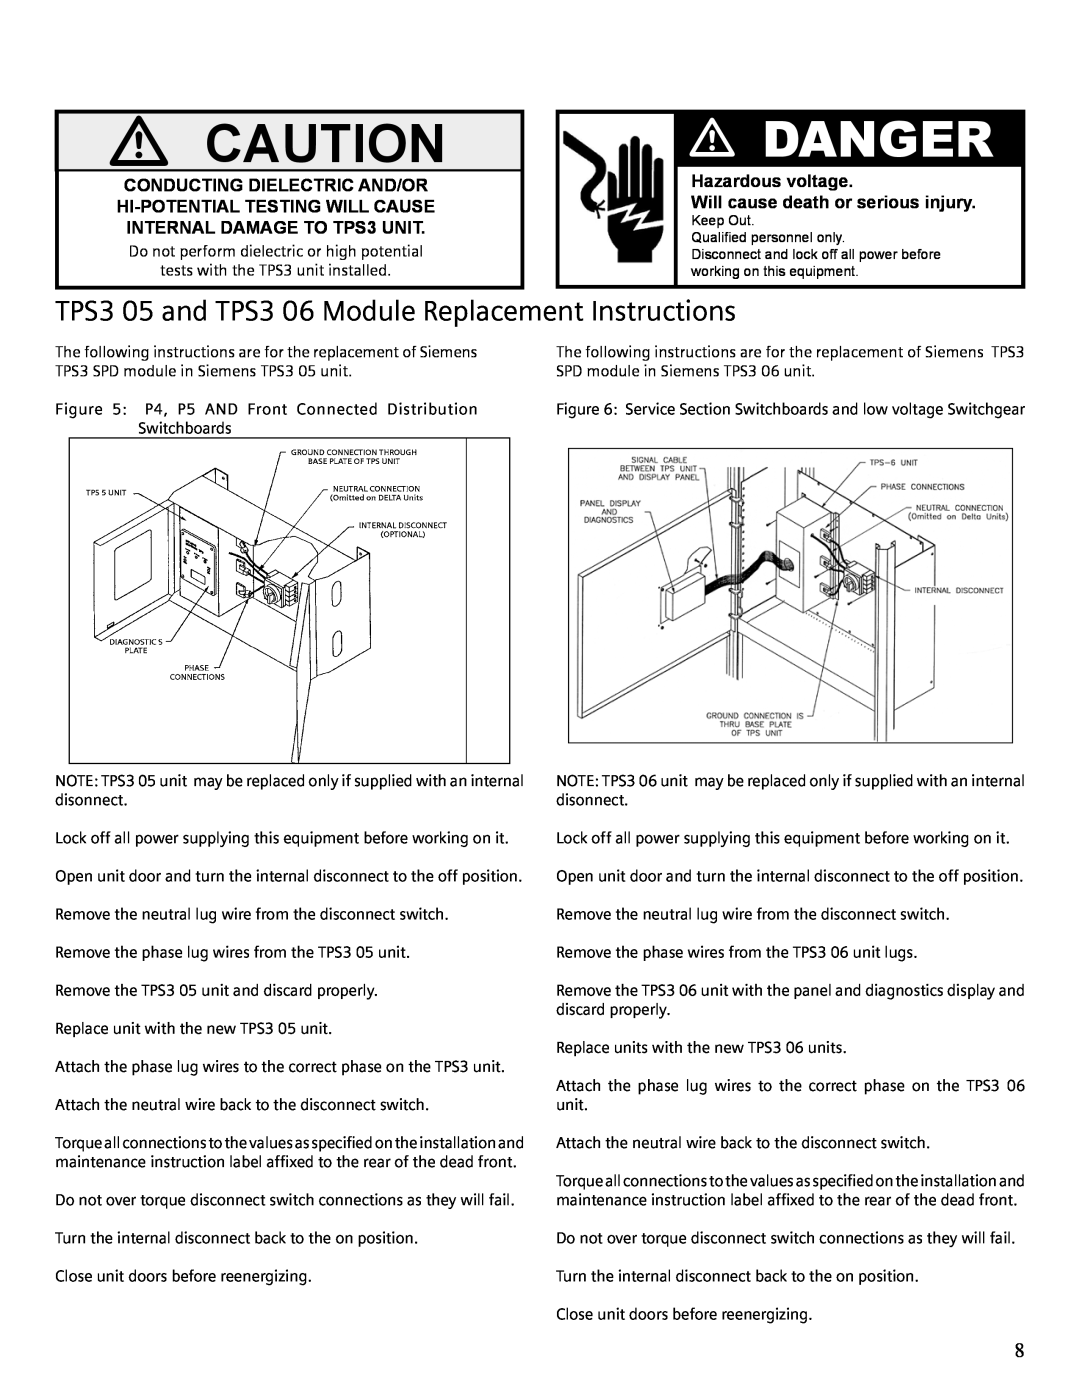 Siemens user manual TPS3 05 and TPS3 06 Module Replacement Instructions, V Caution, V Danger 